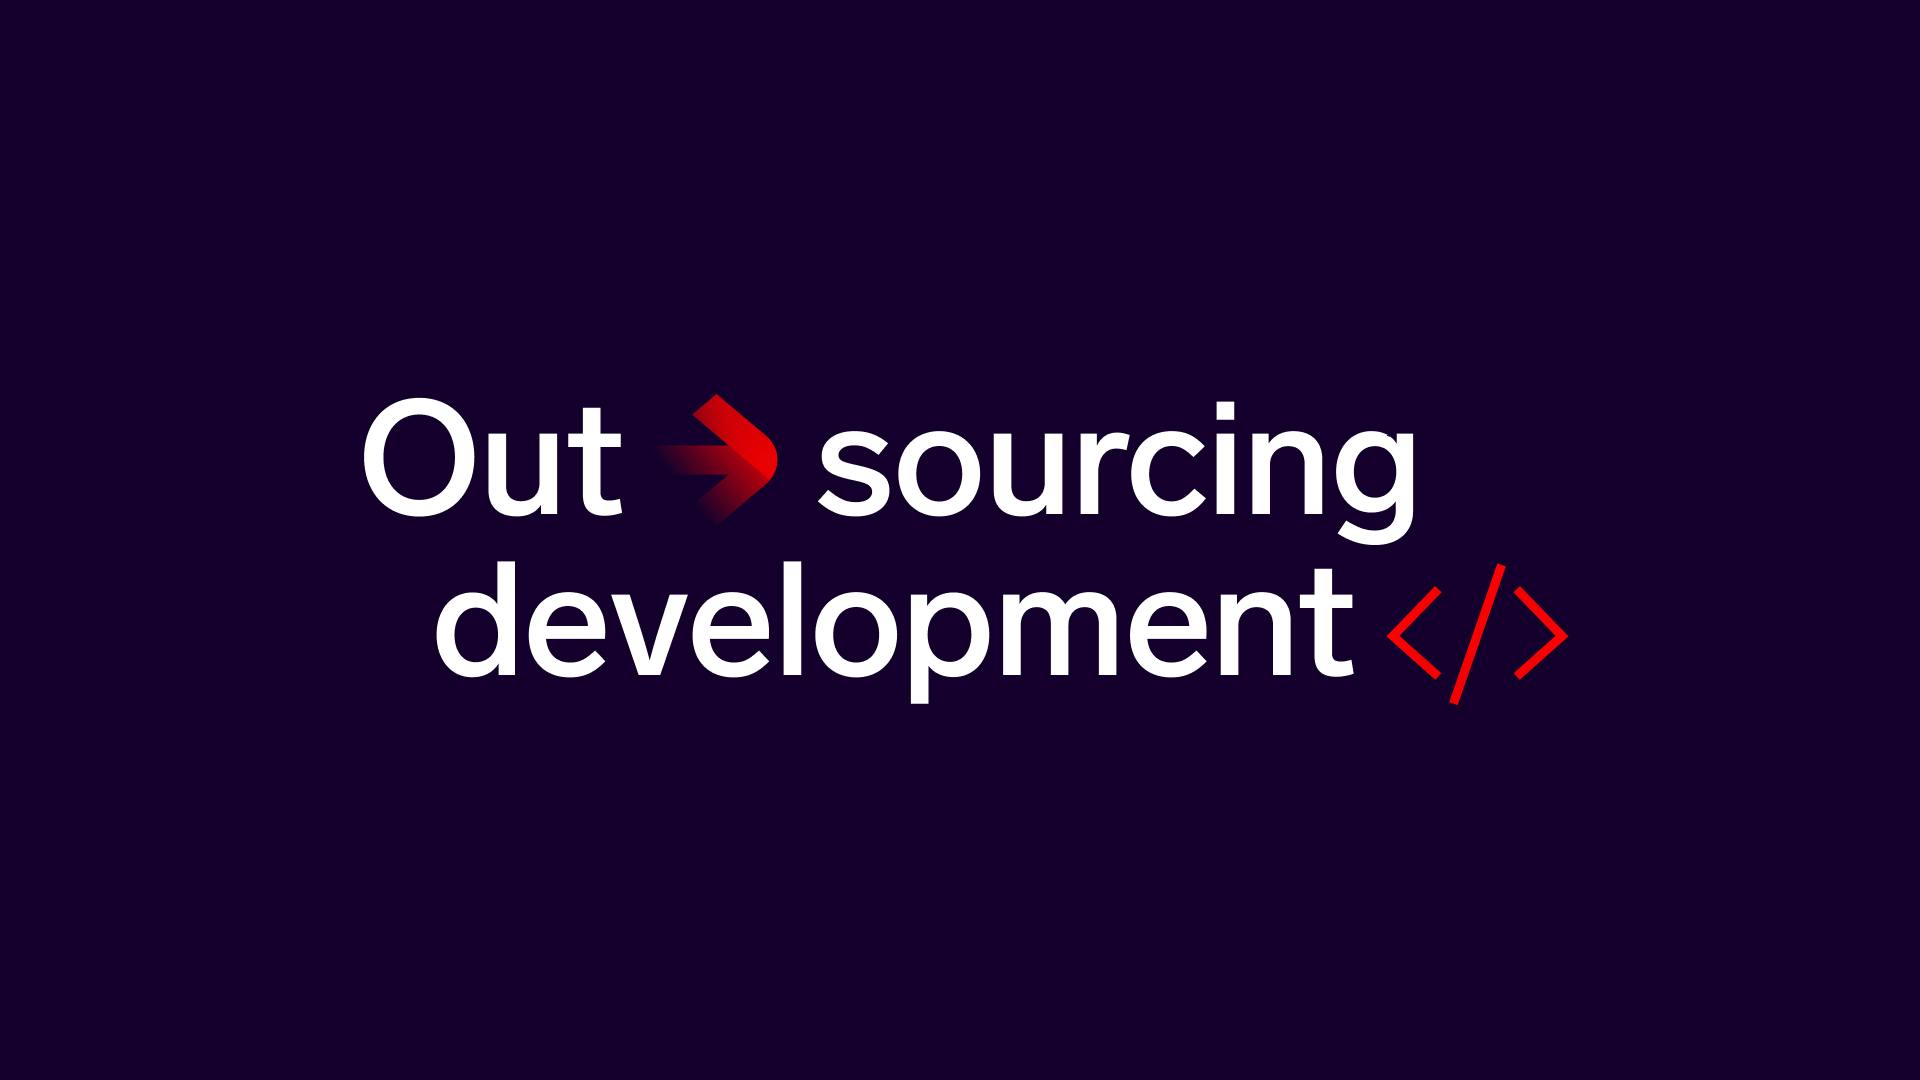 5 reasons why your startup should consider outsourcing development